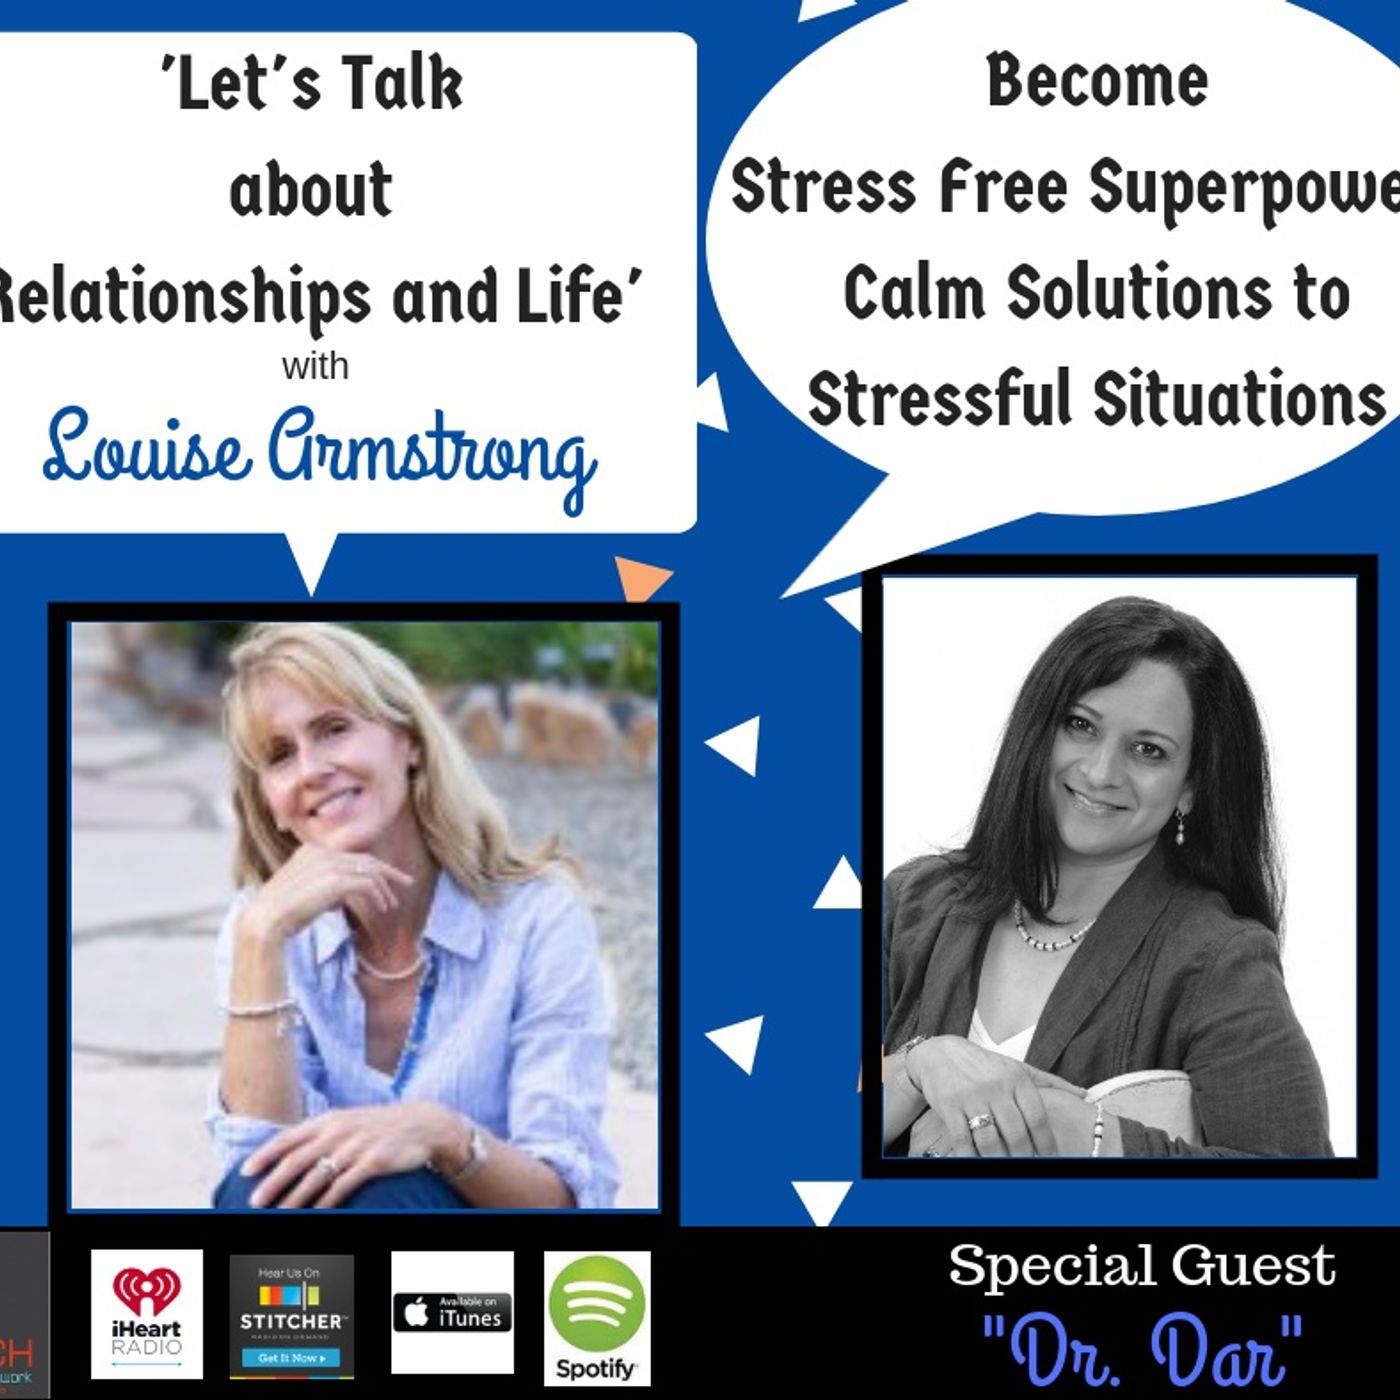 Calm Solutions to Stressful Situations with Special Guest, "Dr. Dar" Darshana Hawks